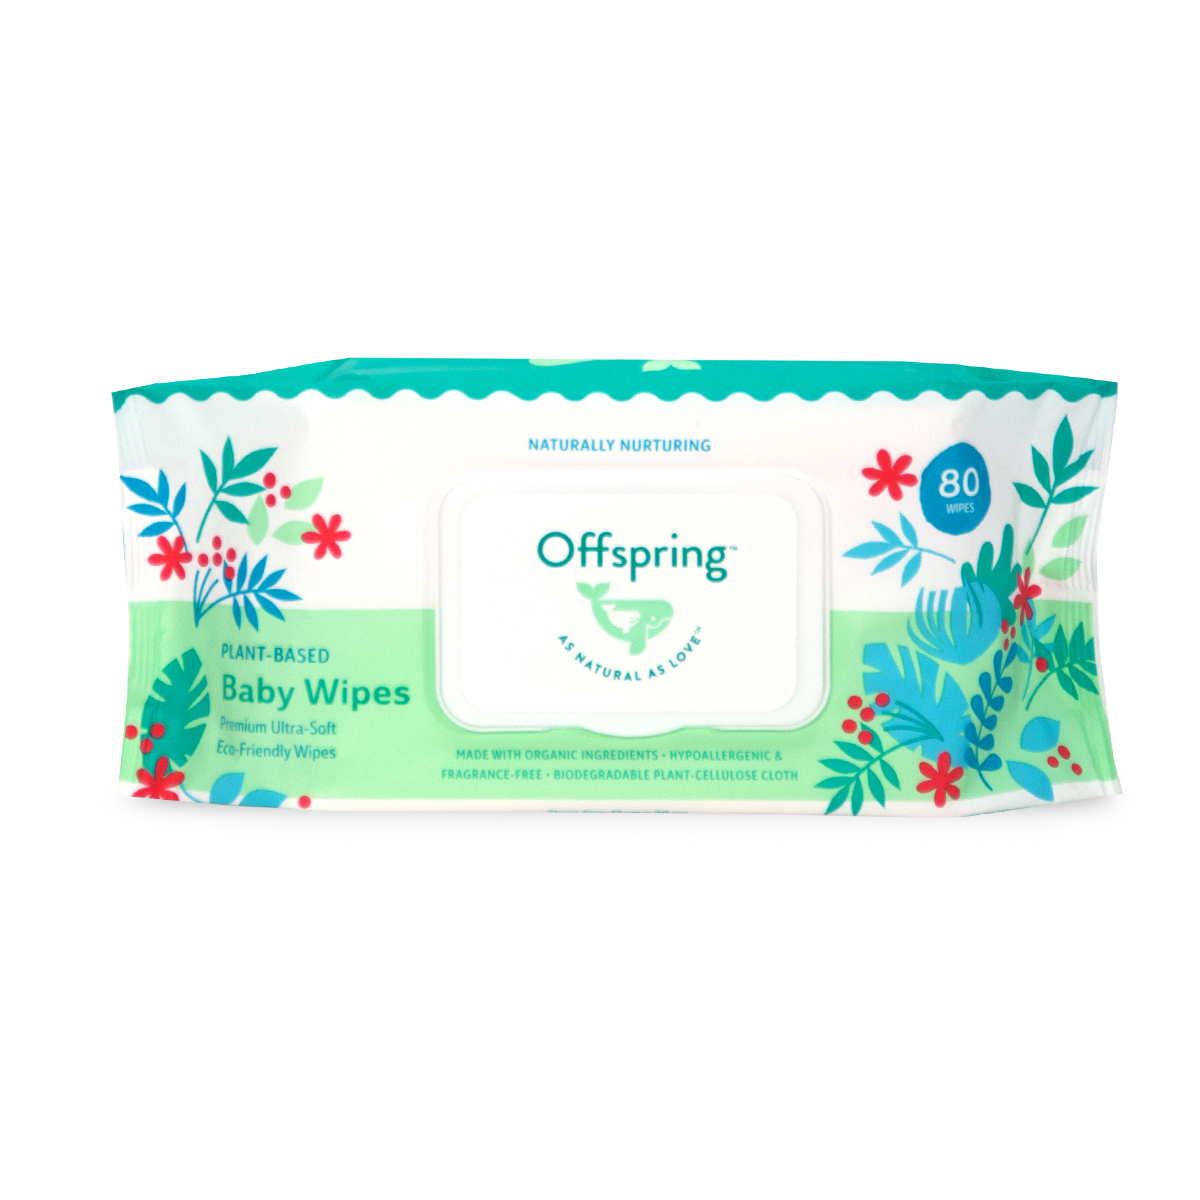 Offspring Plant-Based Baby Wipes 80ct